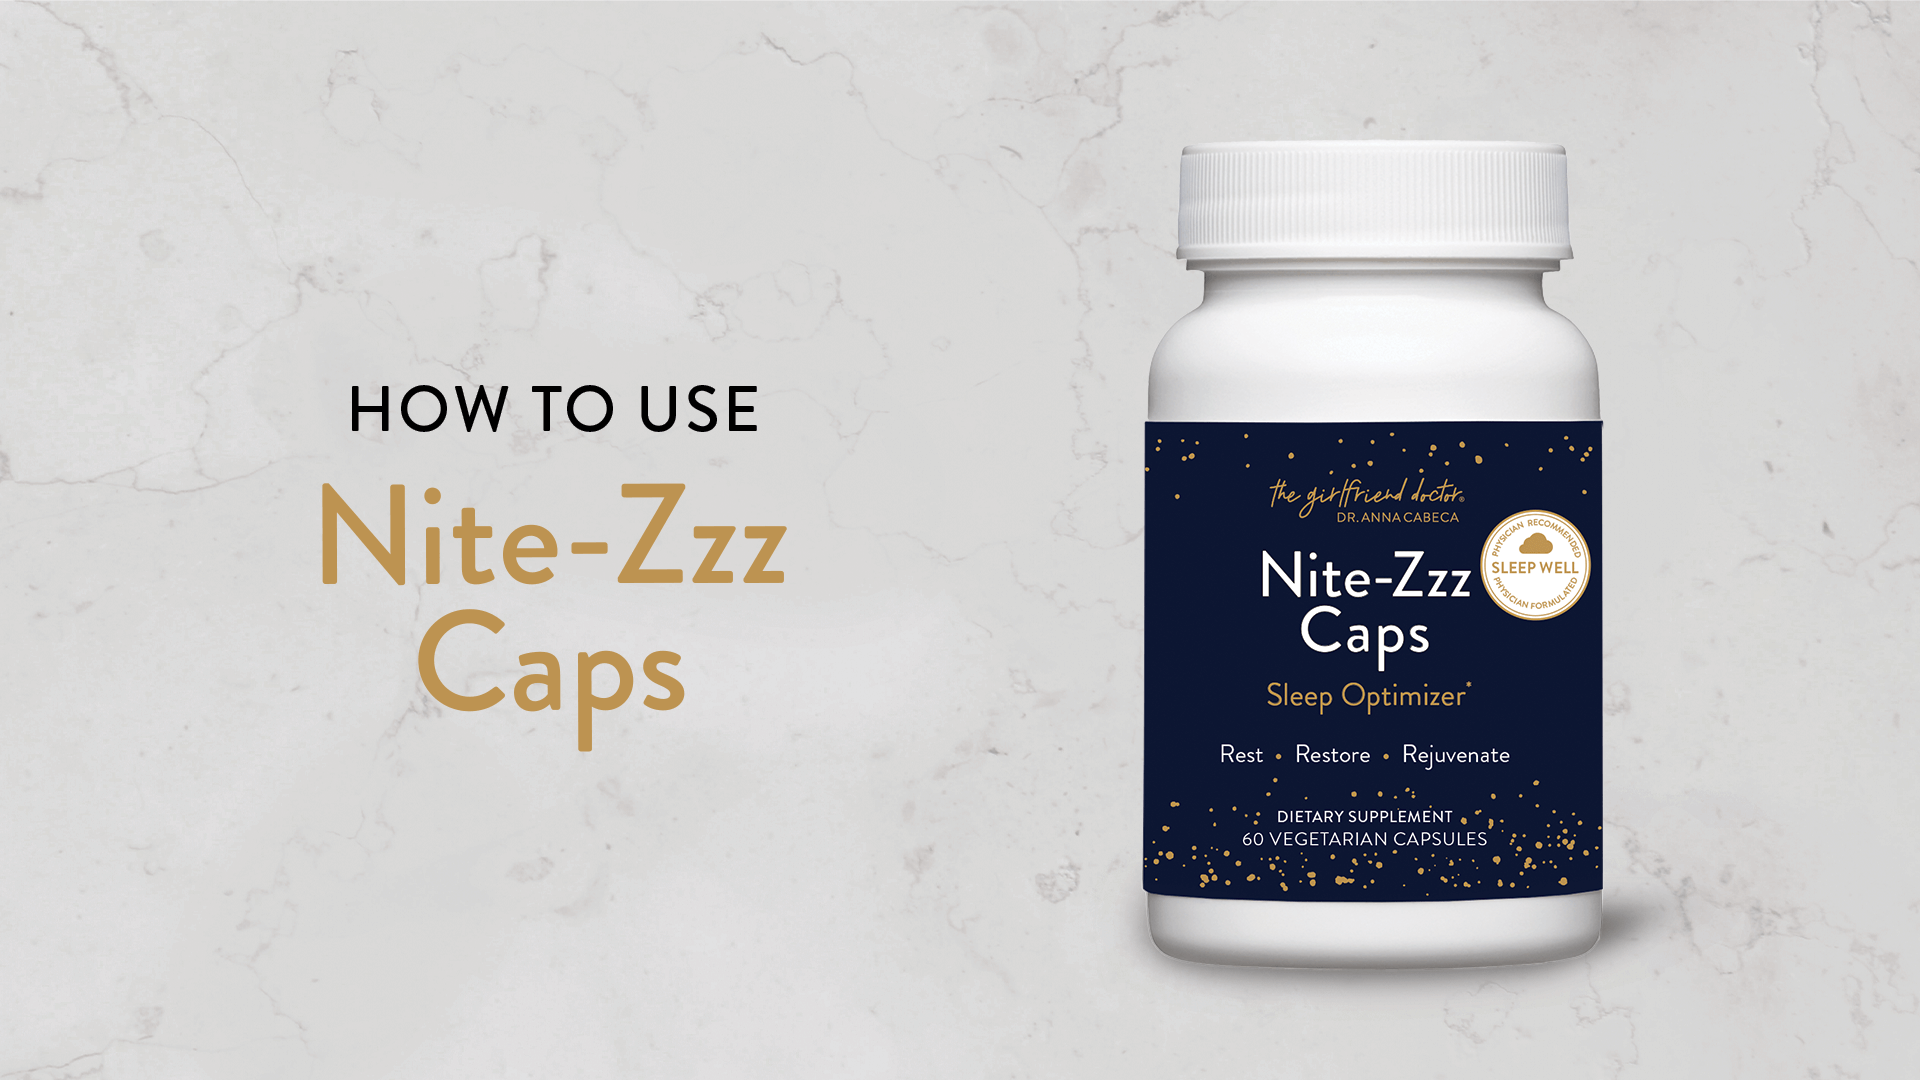 Load video: How to use Nite-Zzz Caps